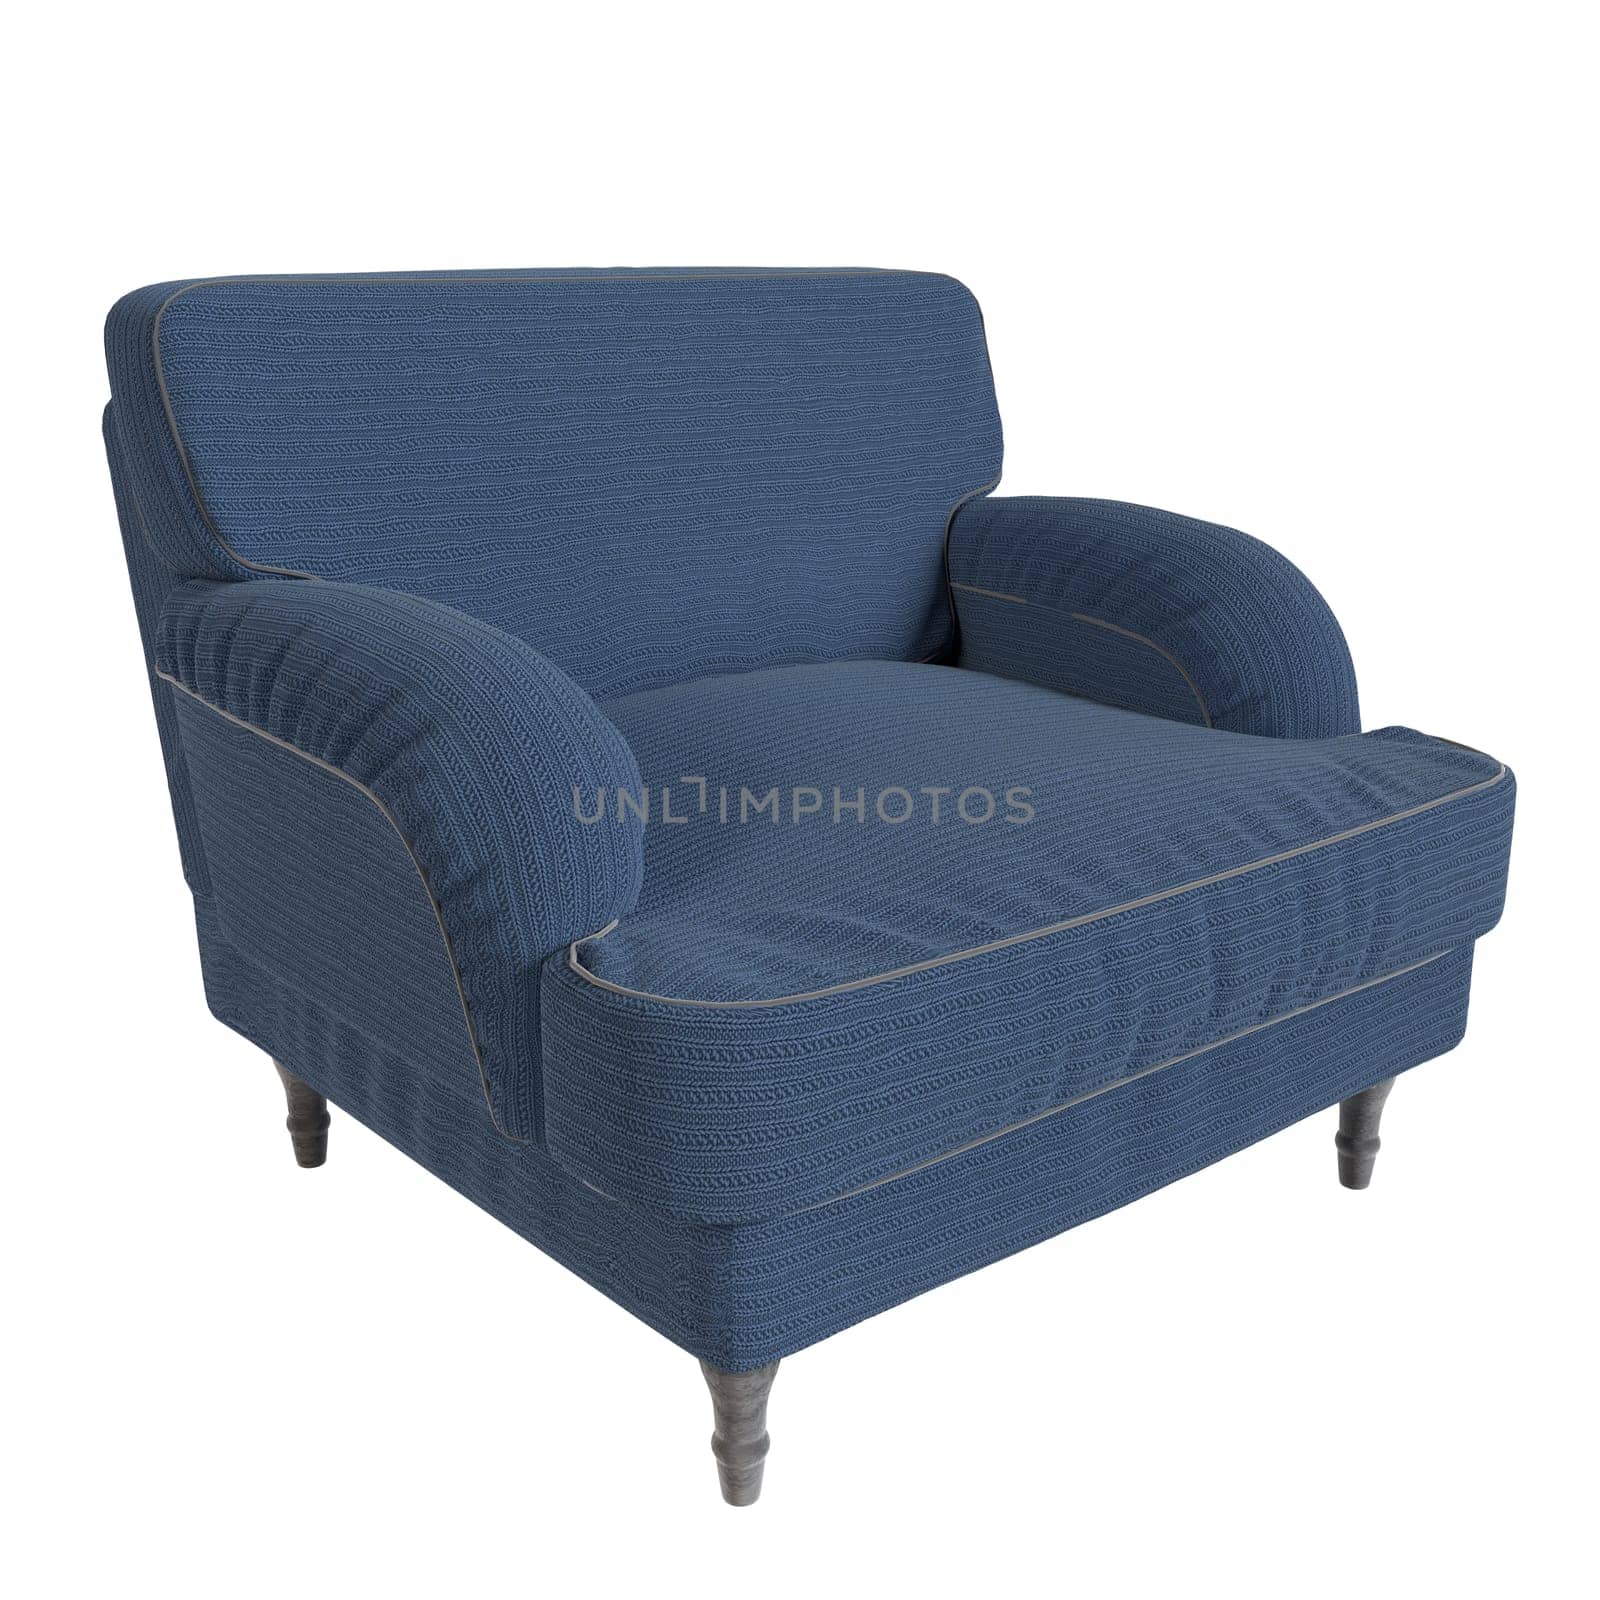 A blue chair with a striped pattern. High quality 3d illustration